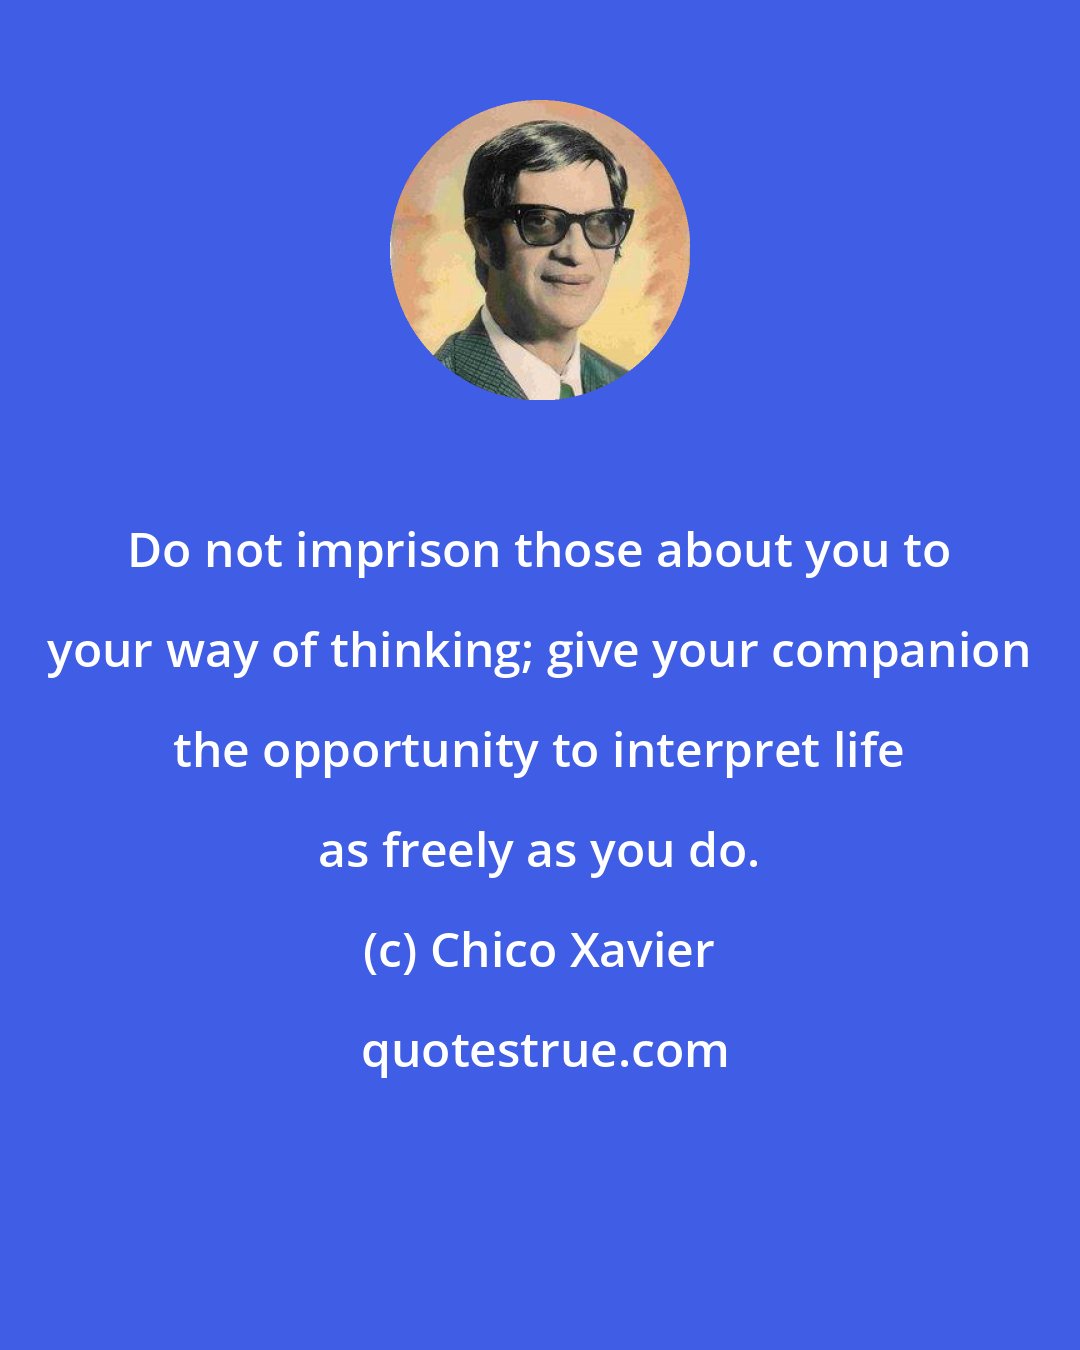 Chico Xavier: Do not imprison those about you to your way of thinking; give your companion the opportunity to interpret life as freely as you do.